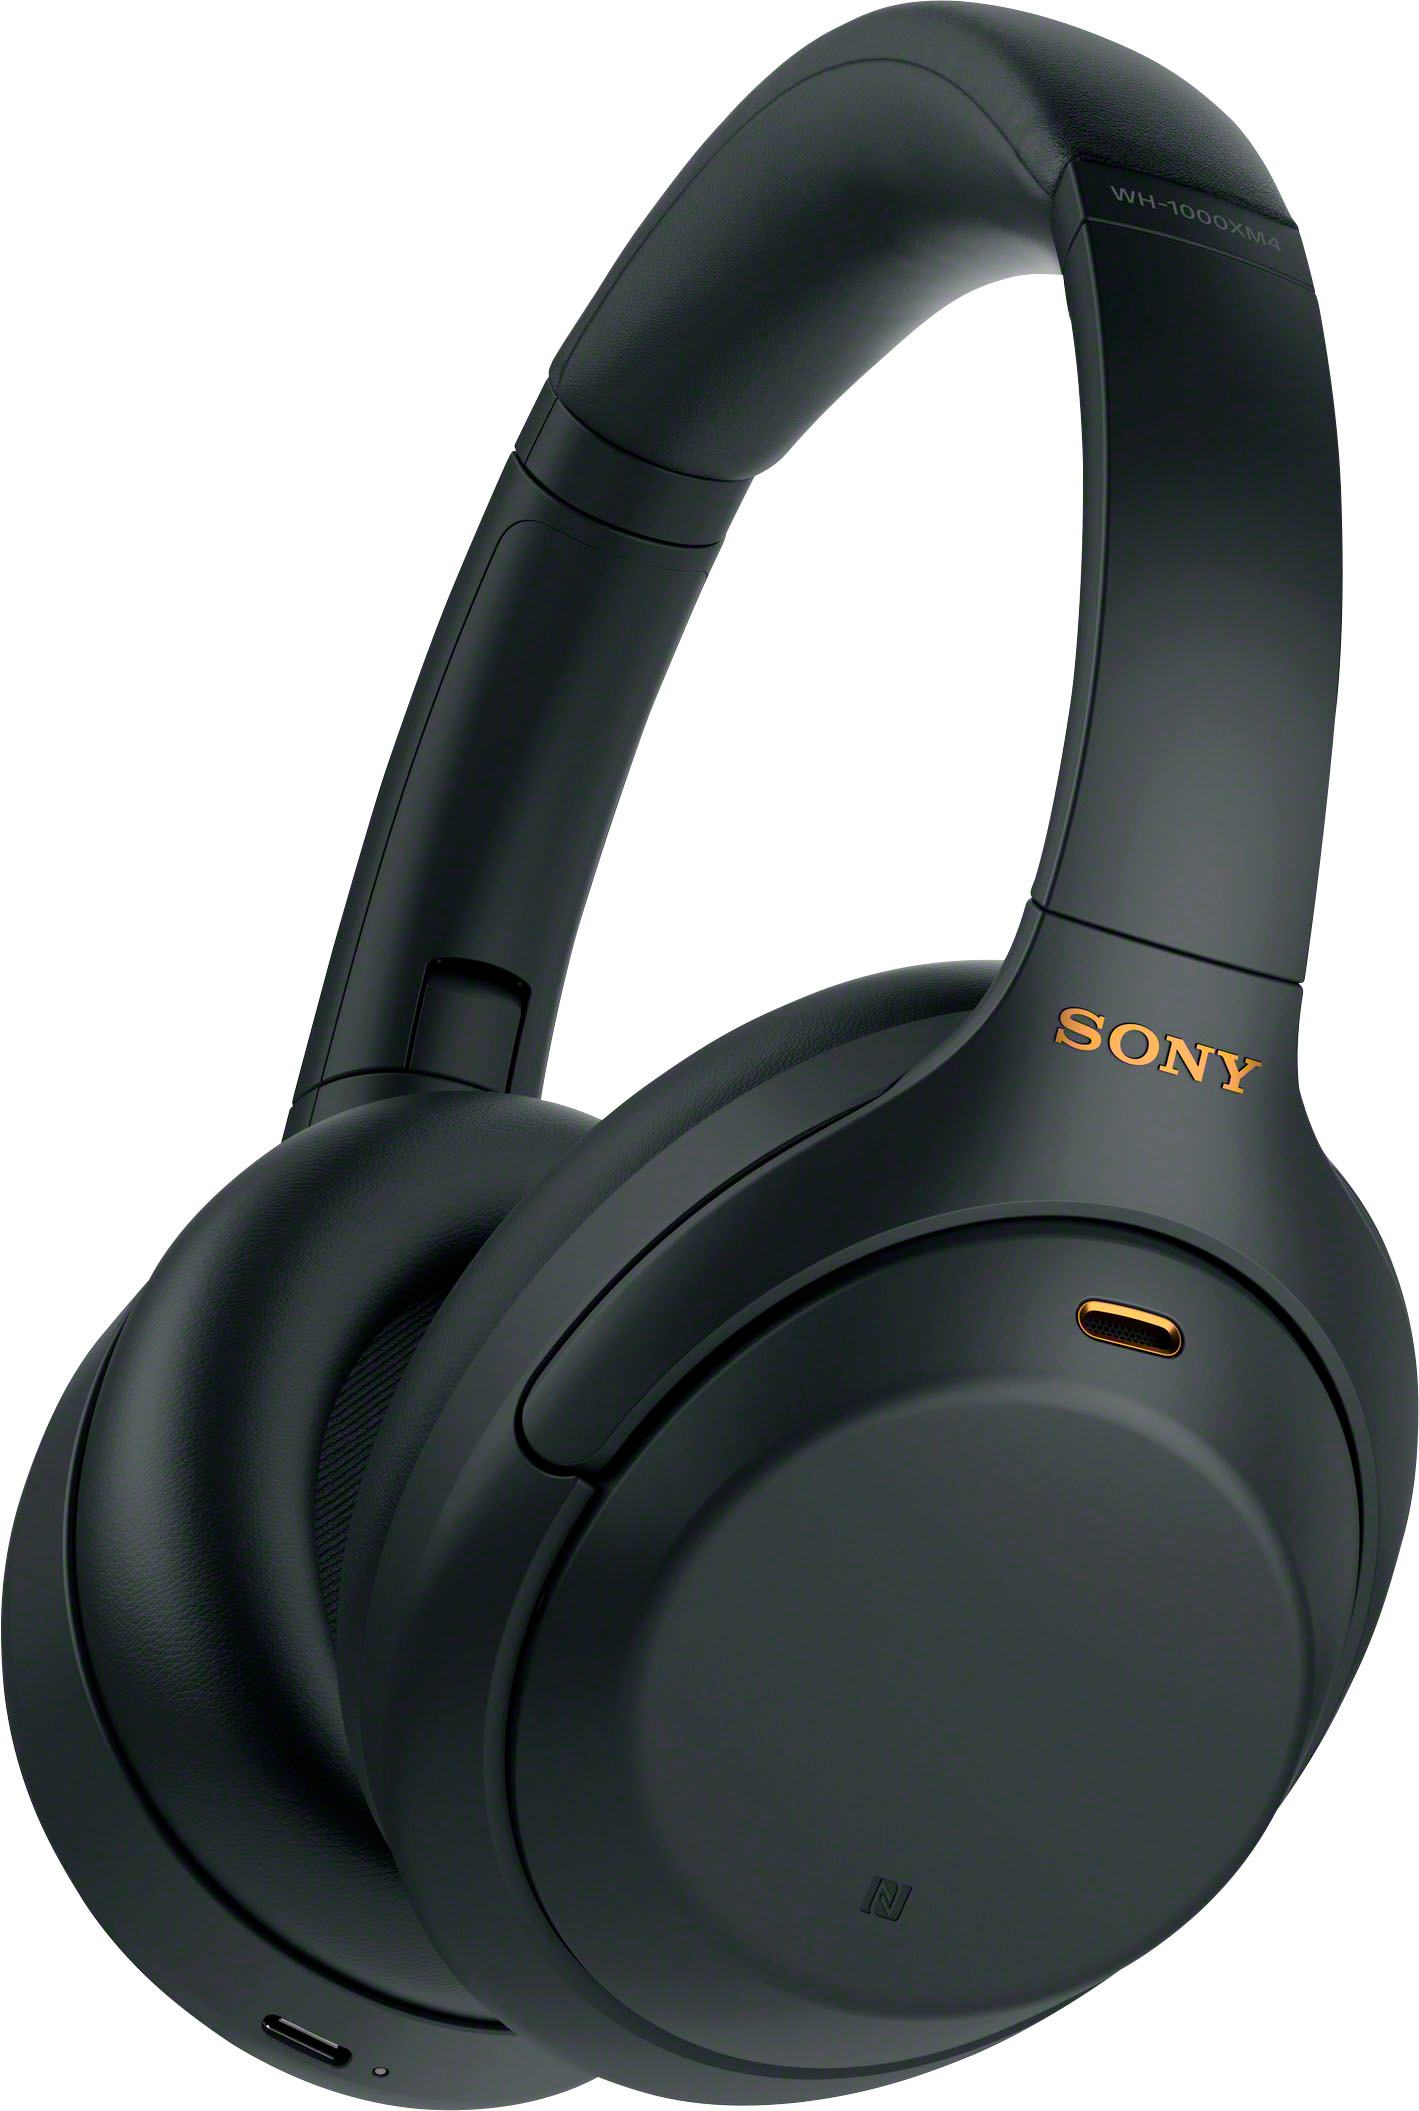 Sony - WH-1000XM4 - now 35% off